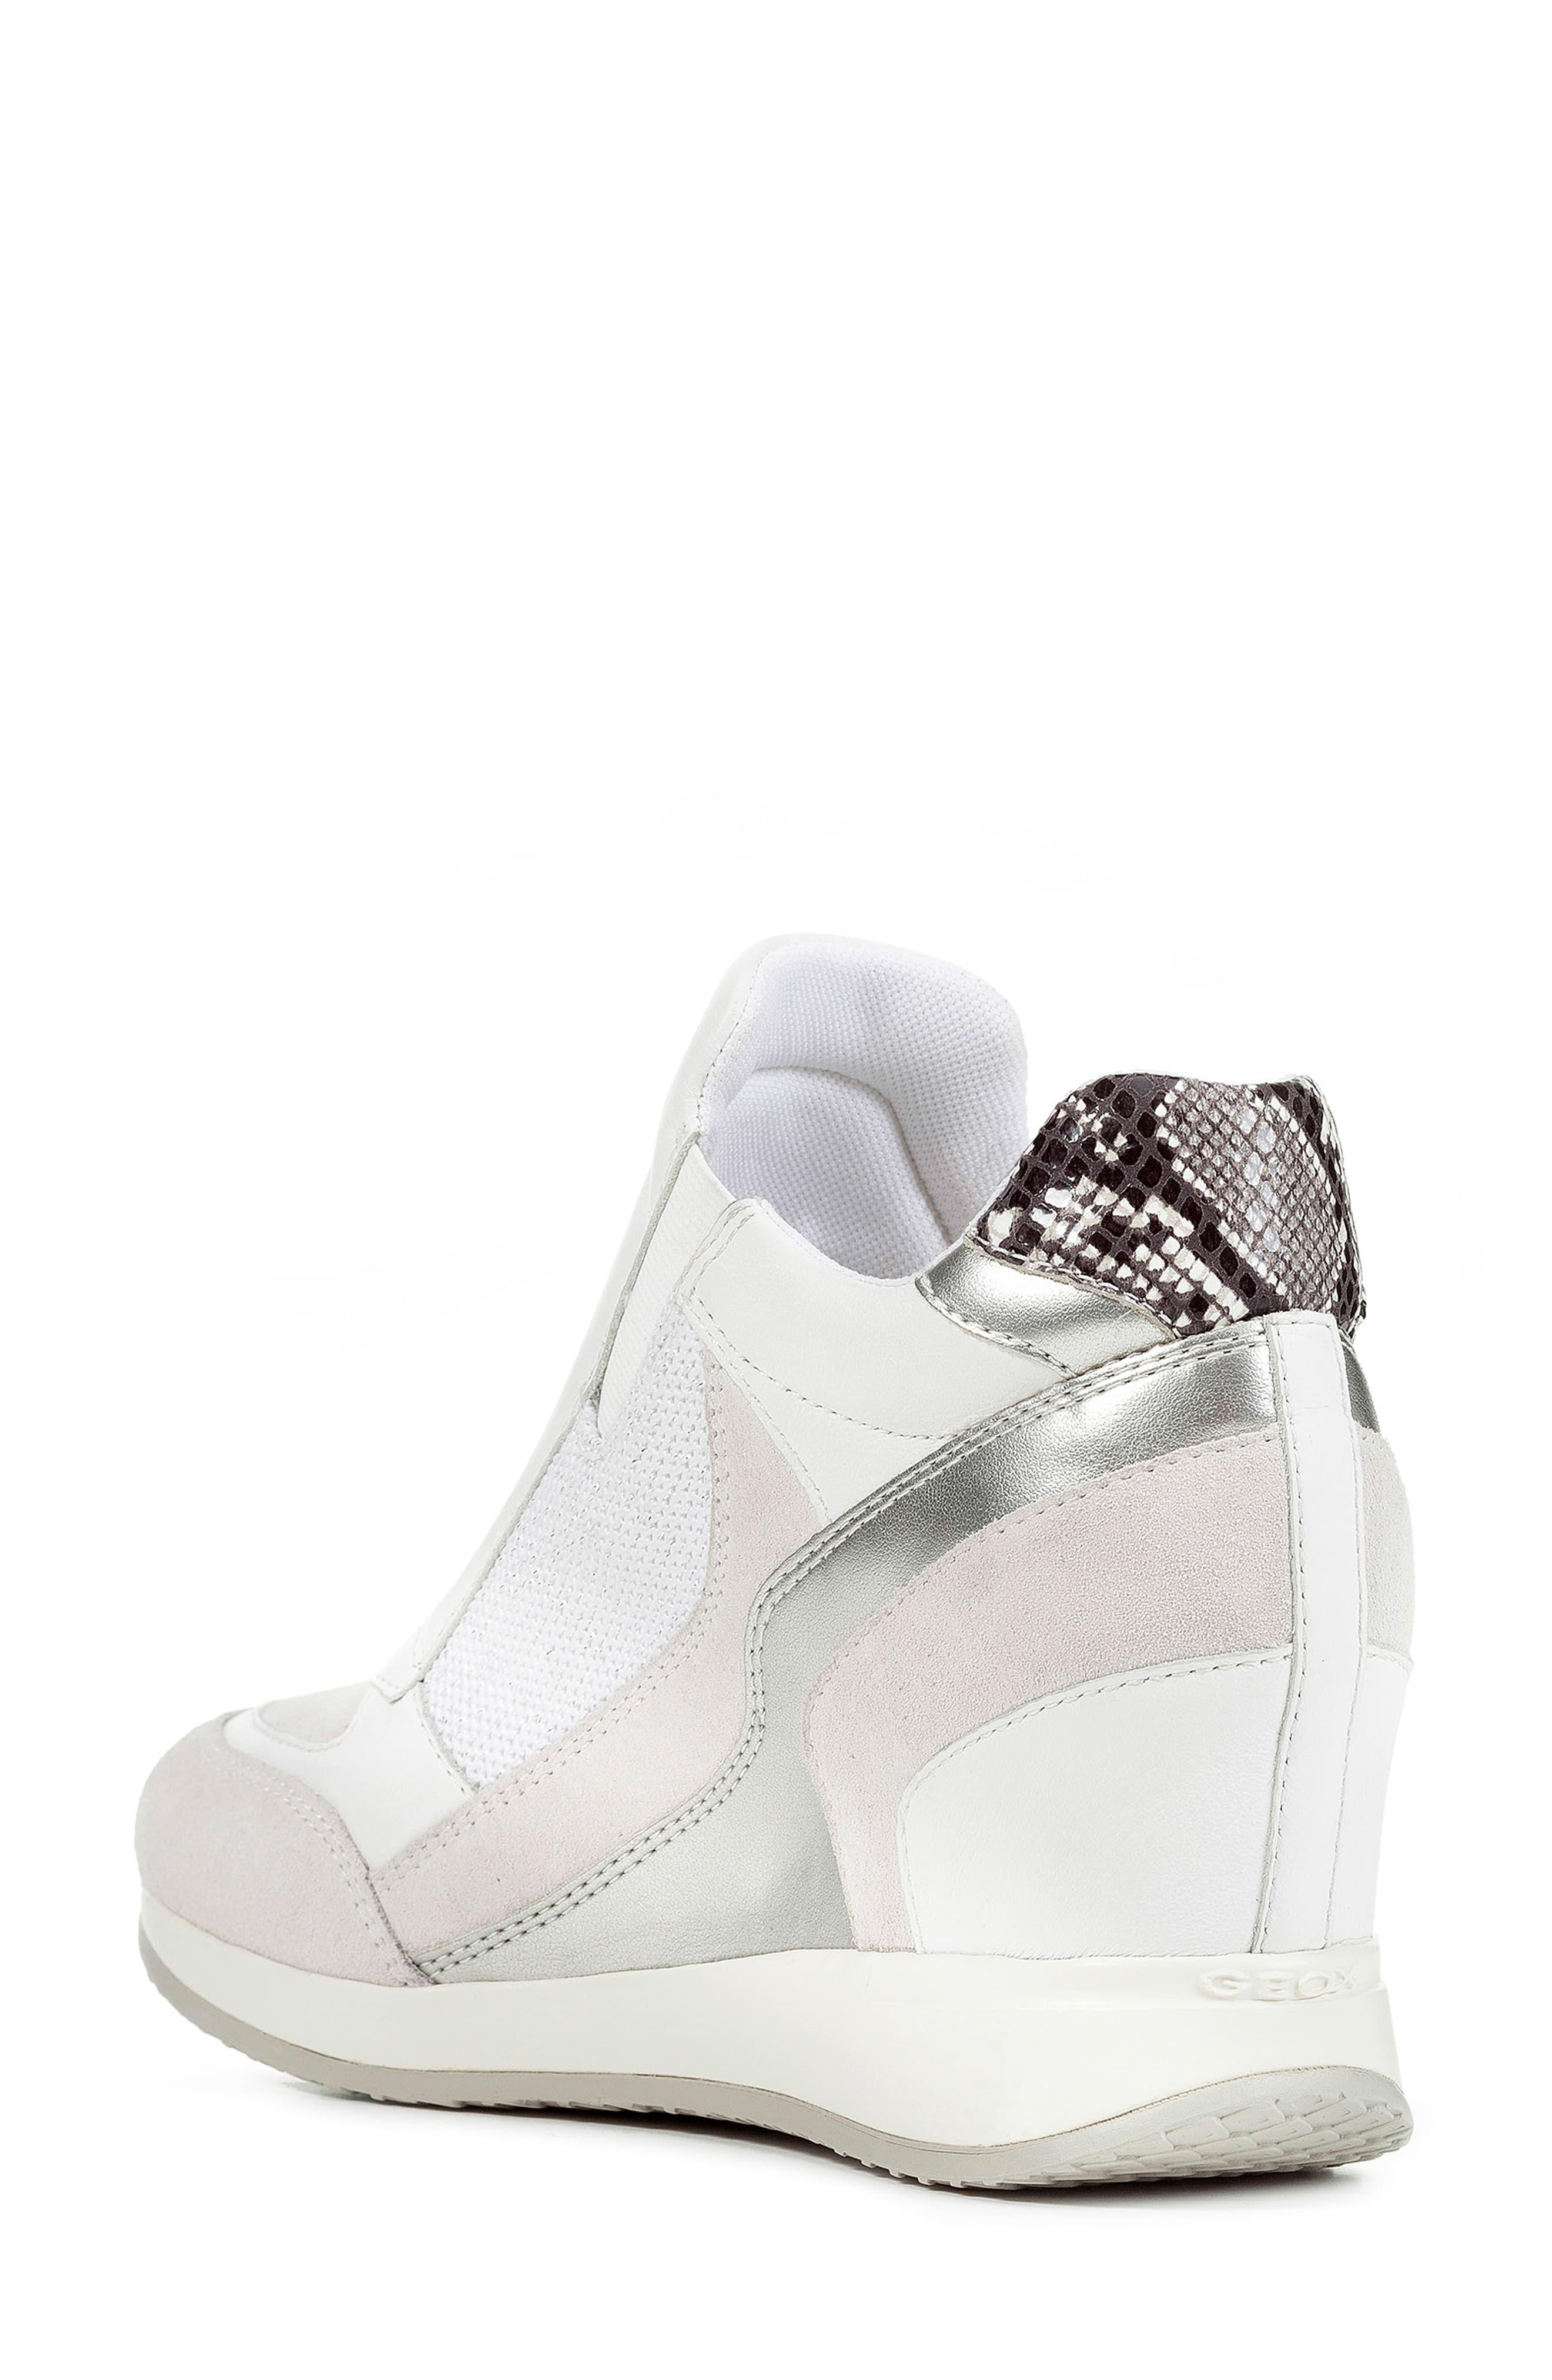 Geox Leather Nydame Wedge Sneaker in White Leather (White) - Lyst